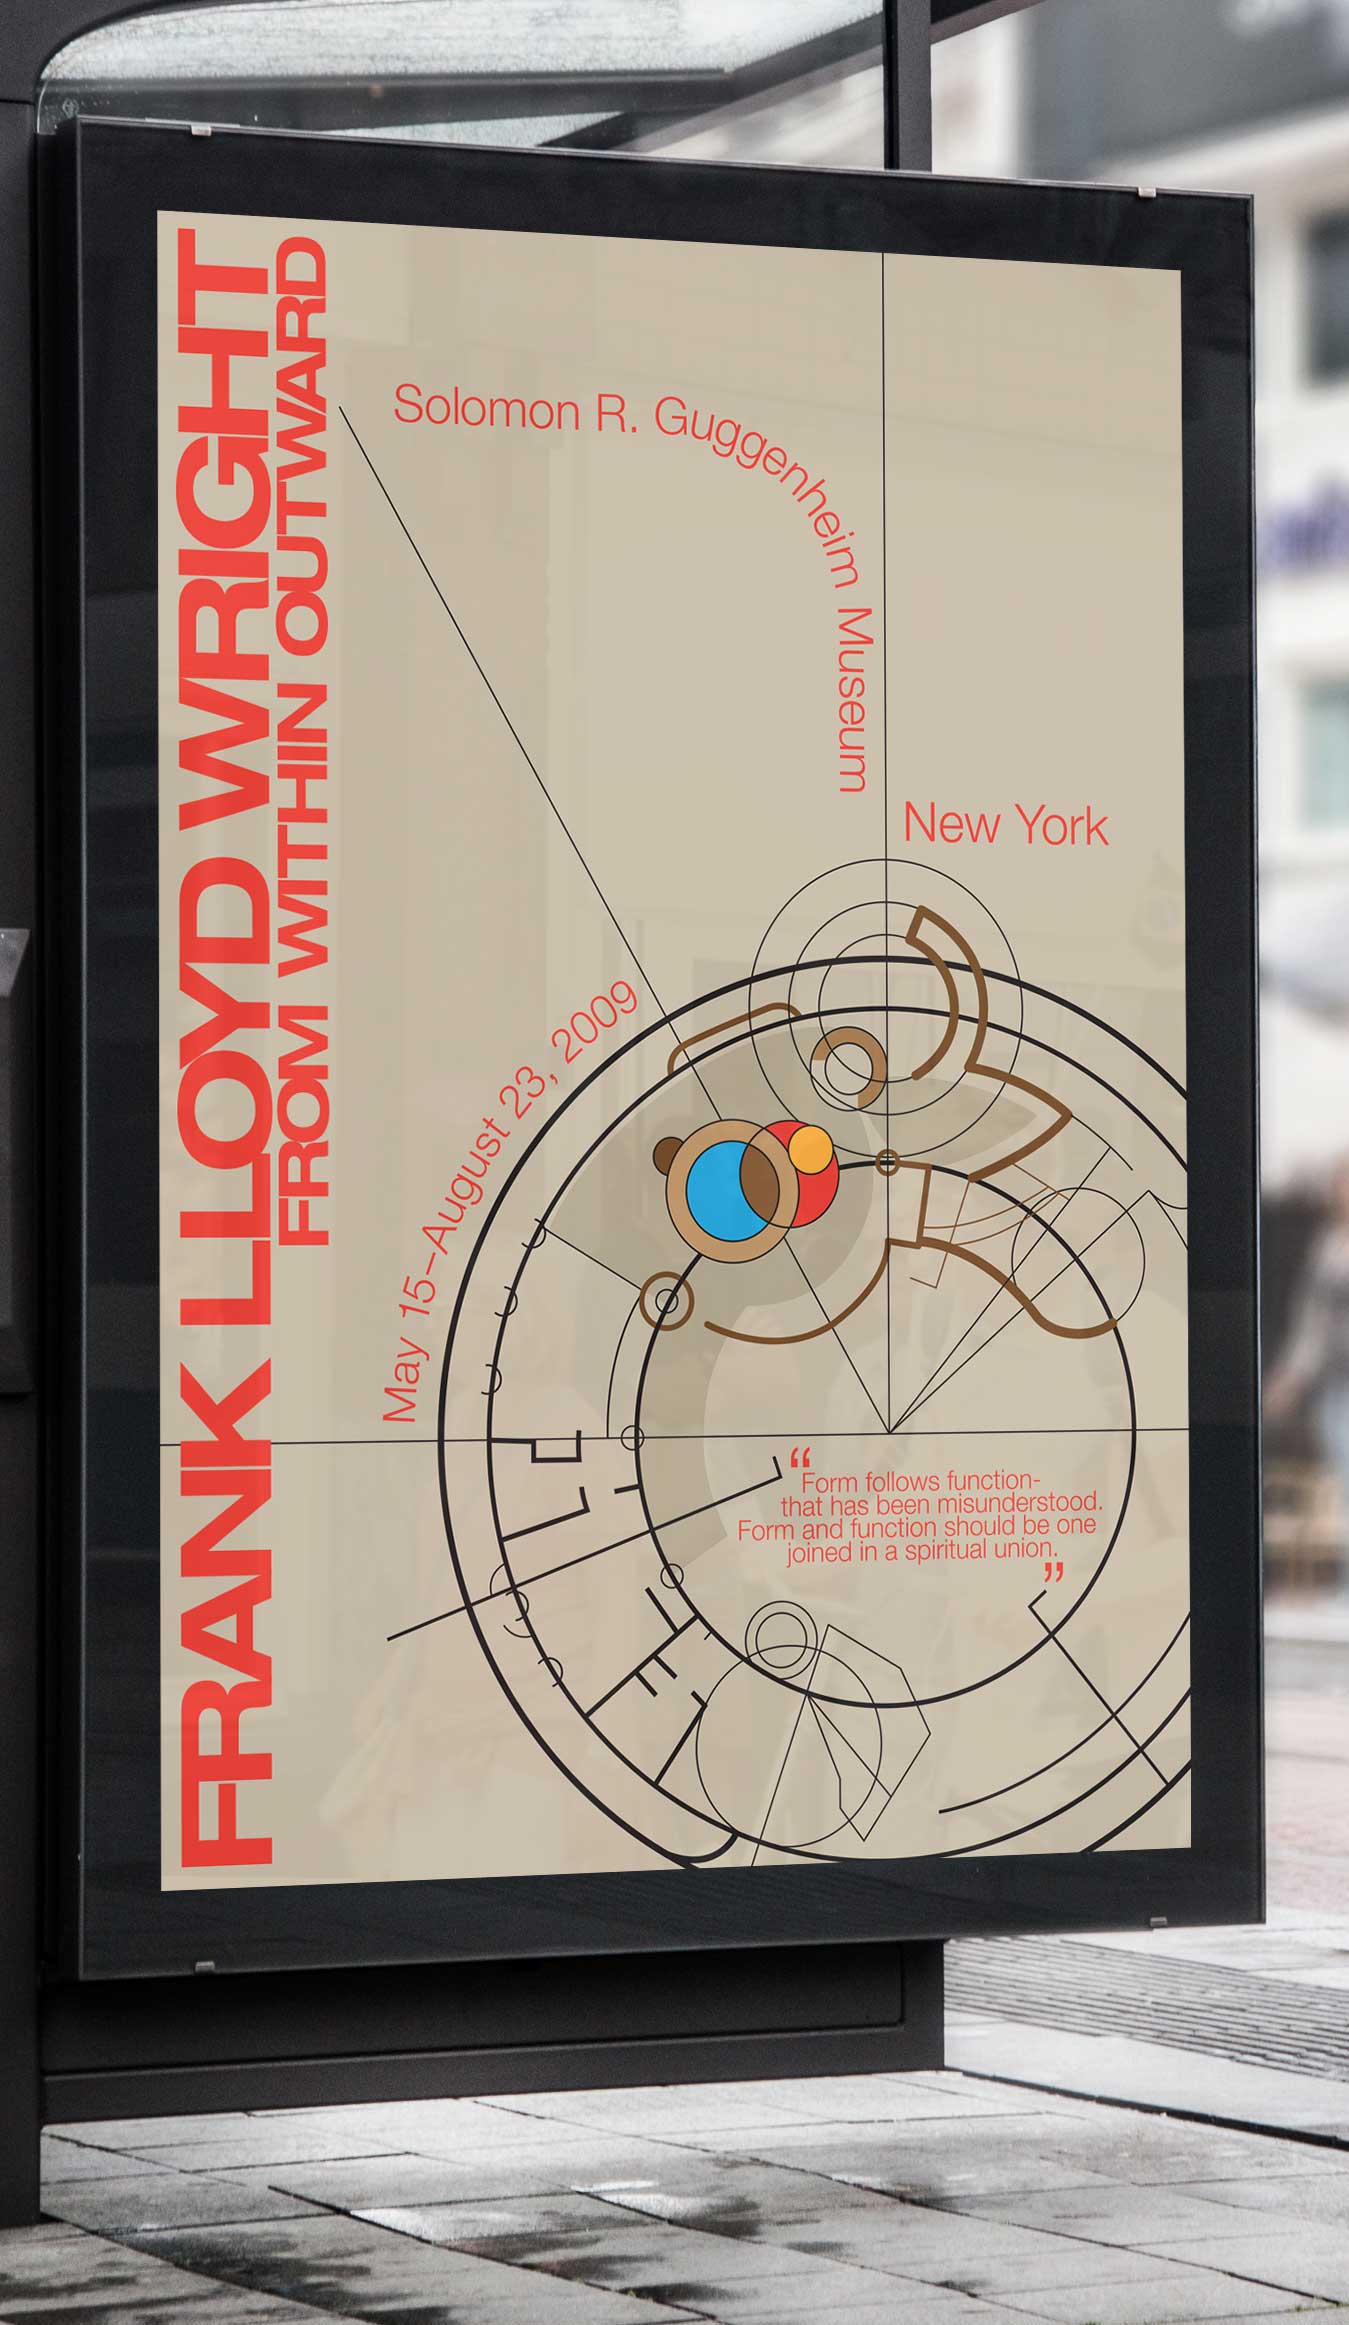 Frank Lloyd Wright exhibit promotional material